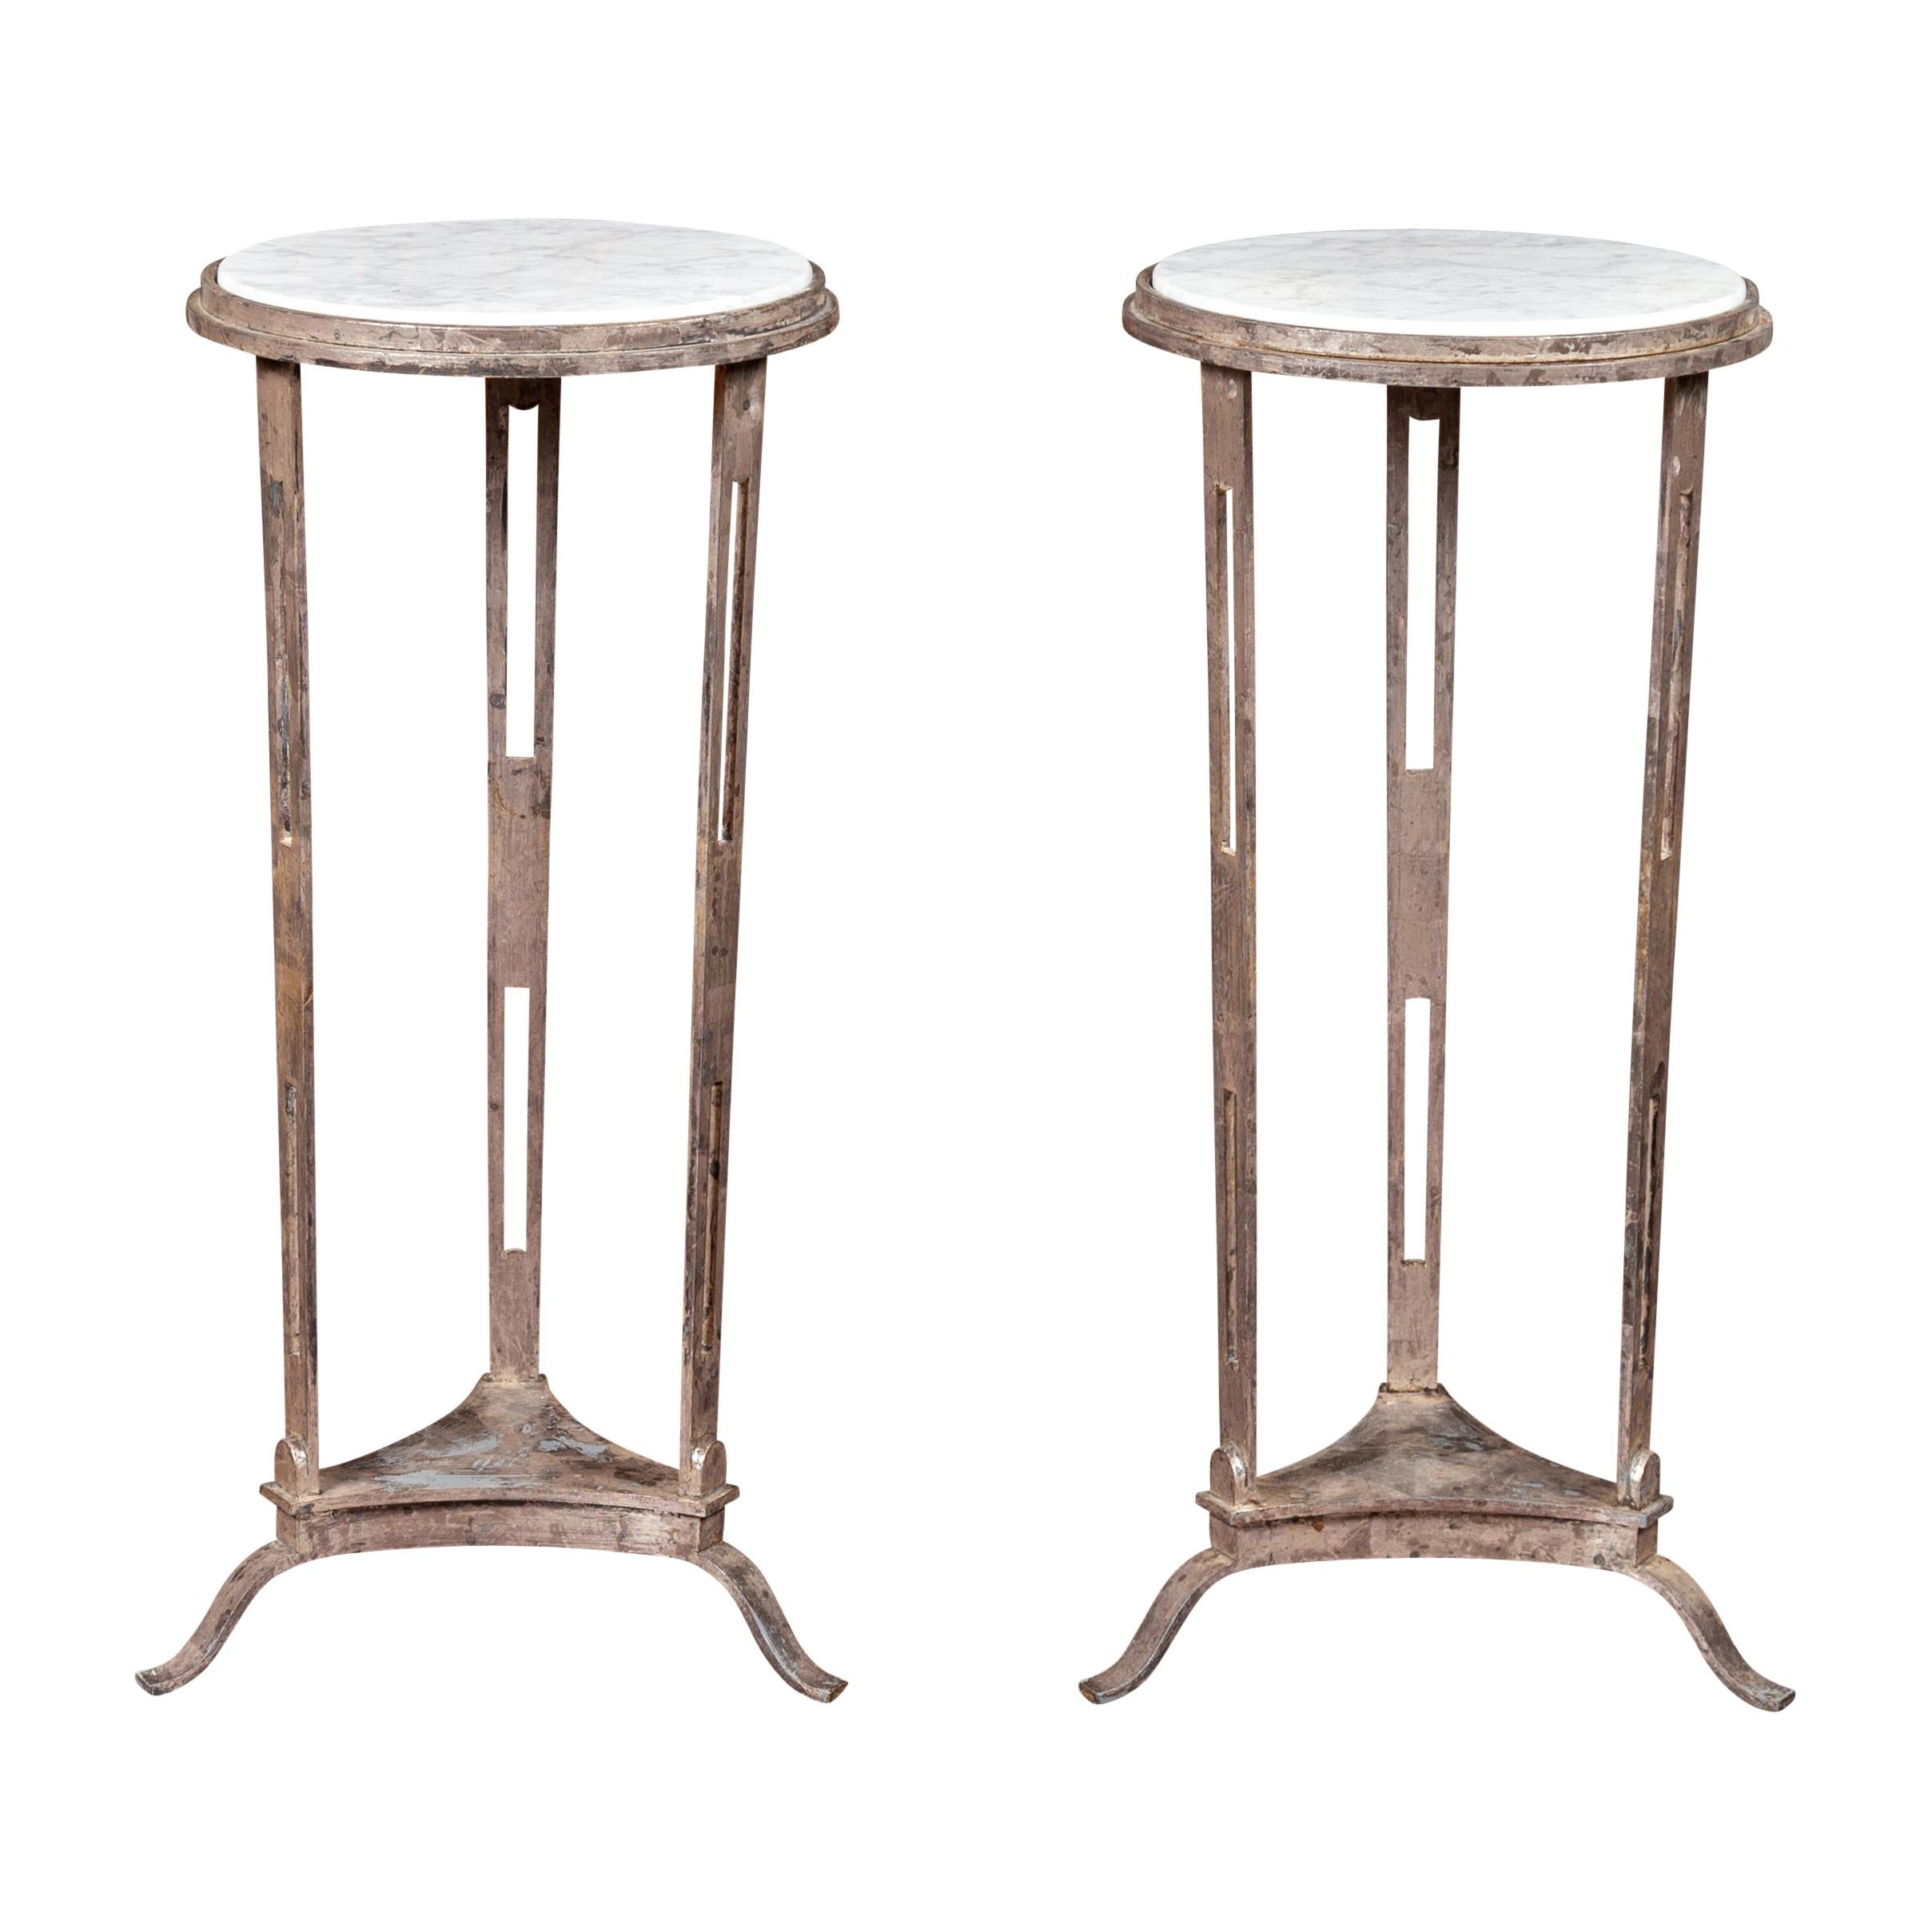 Pair of Vintage Italian Silver Leaf Drinks Tables with White Veined Marble Tops